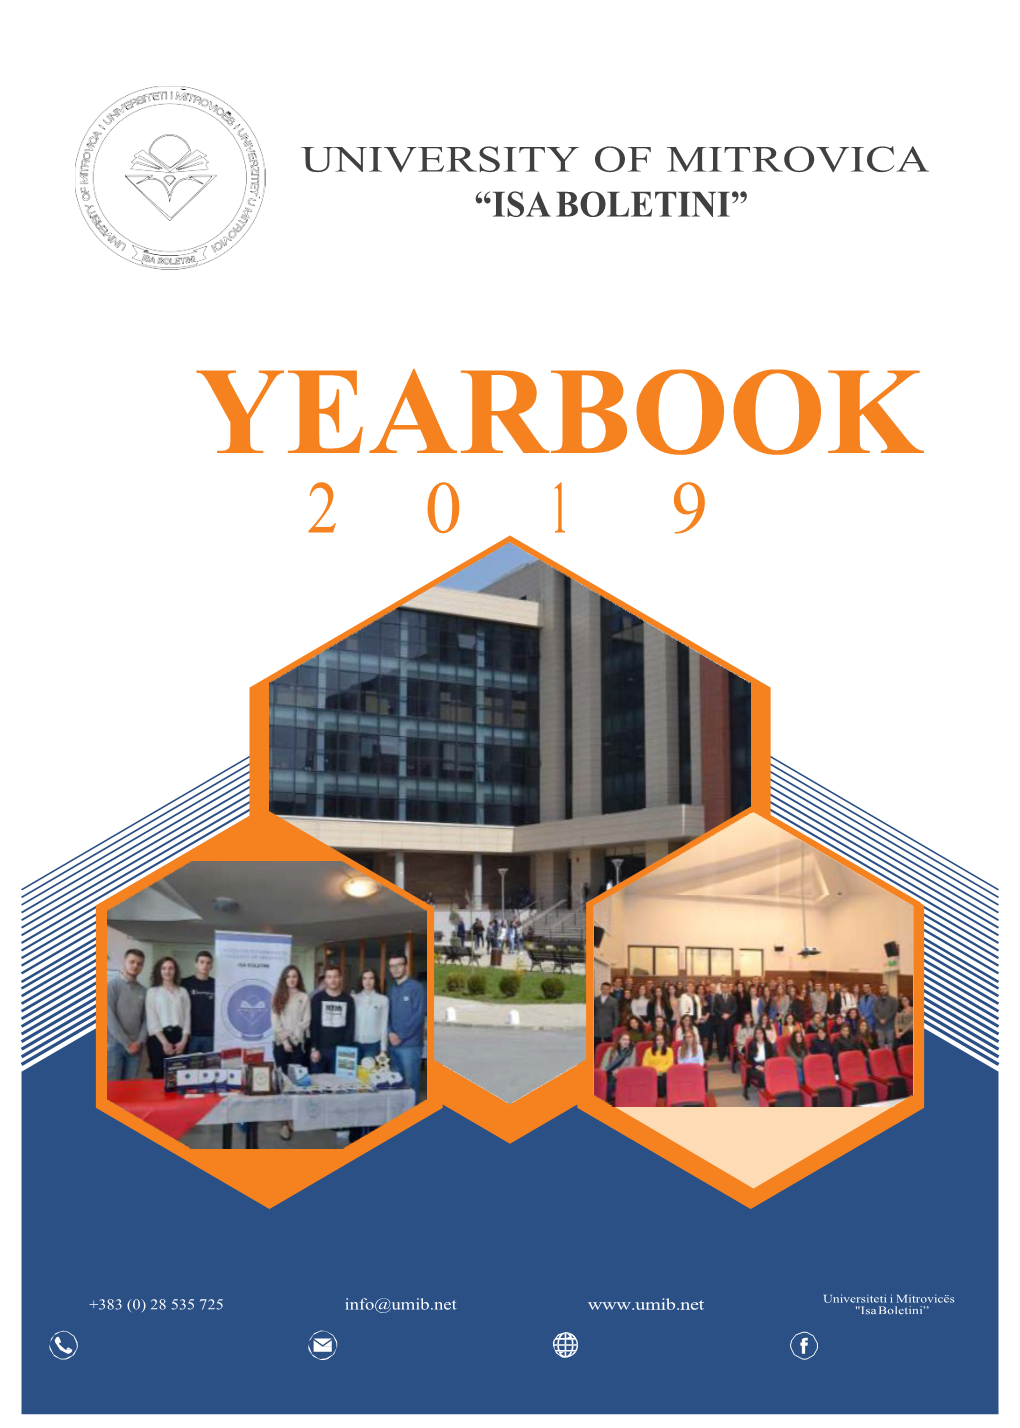 Yearbook 2 0 1 9